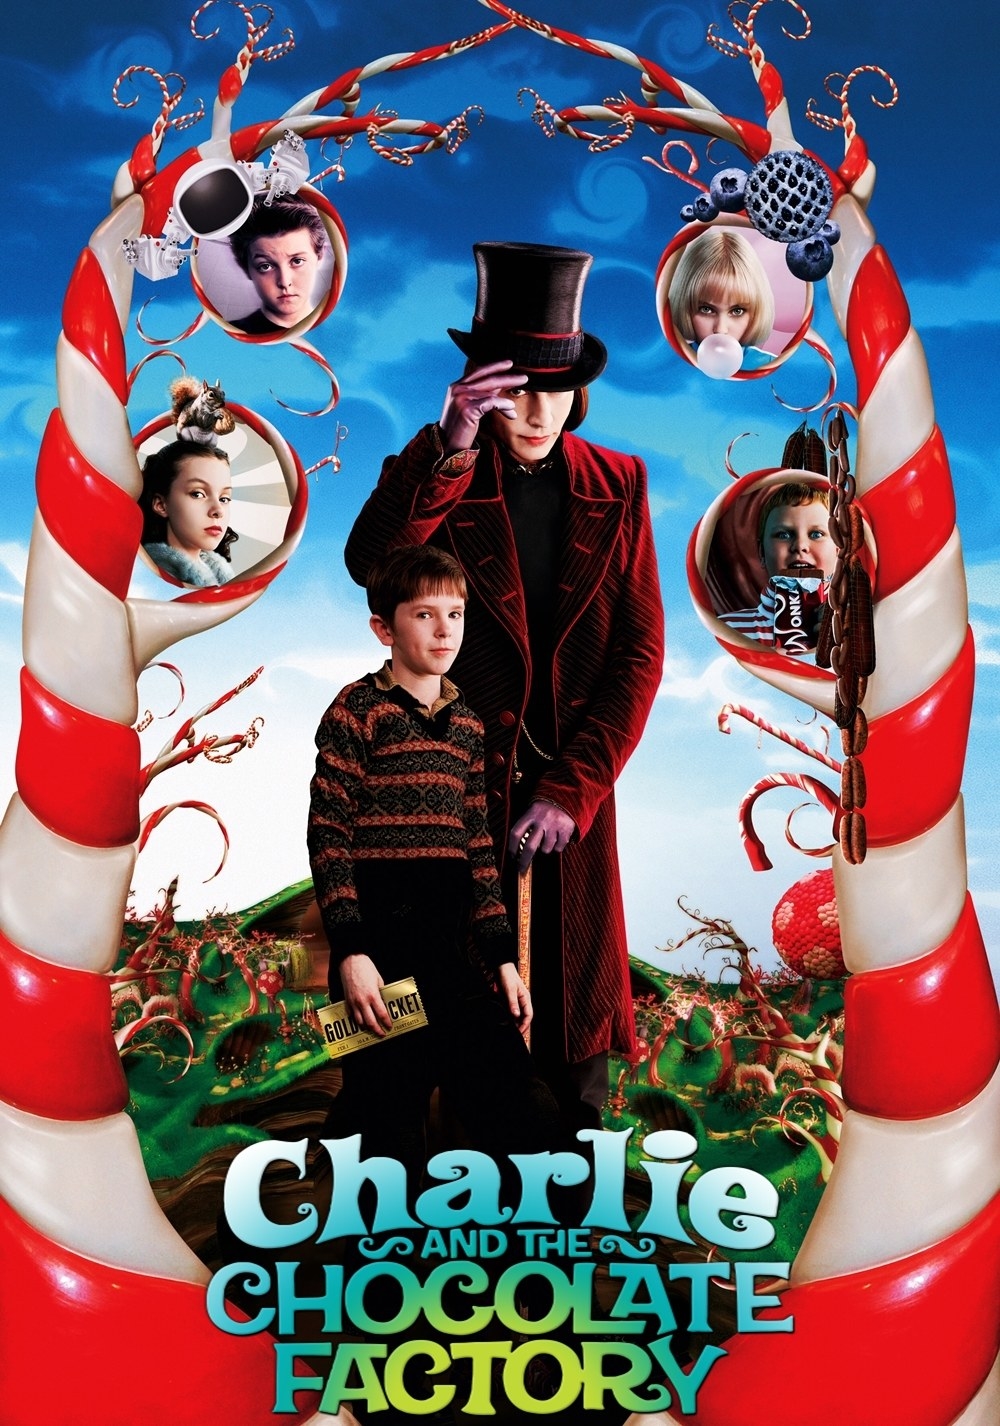 The poster of Charlie and the Chocolate Factory.